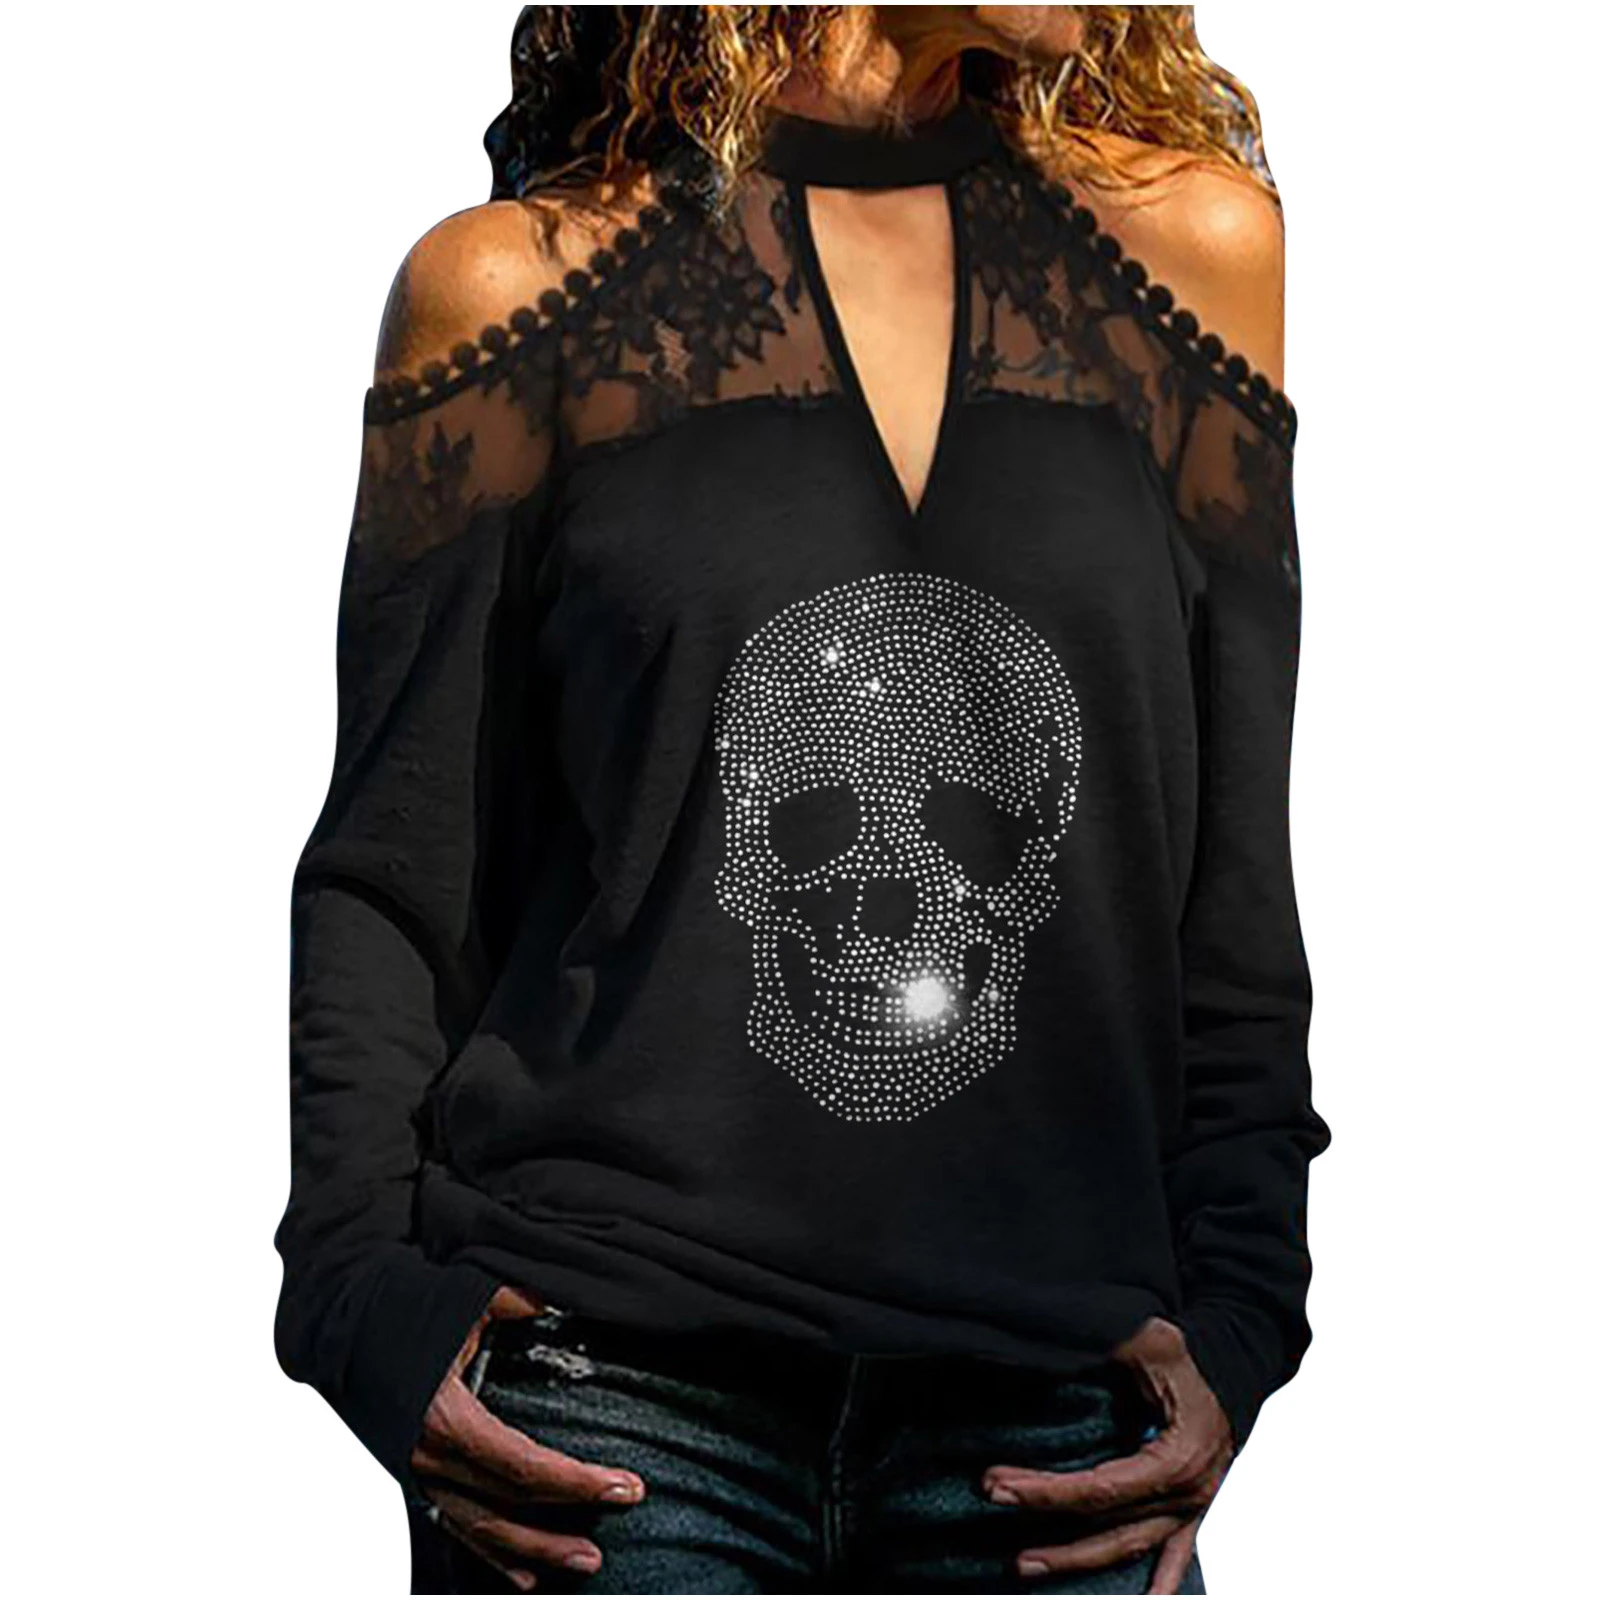 Skull Printed Lace Floral Ladies Tshirt Autumn Hot Drilling Gothic Women Blouses T-Shirt Tops Long Sleeve Sexy Business OL Tops vintage graphic tees